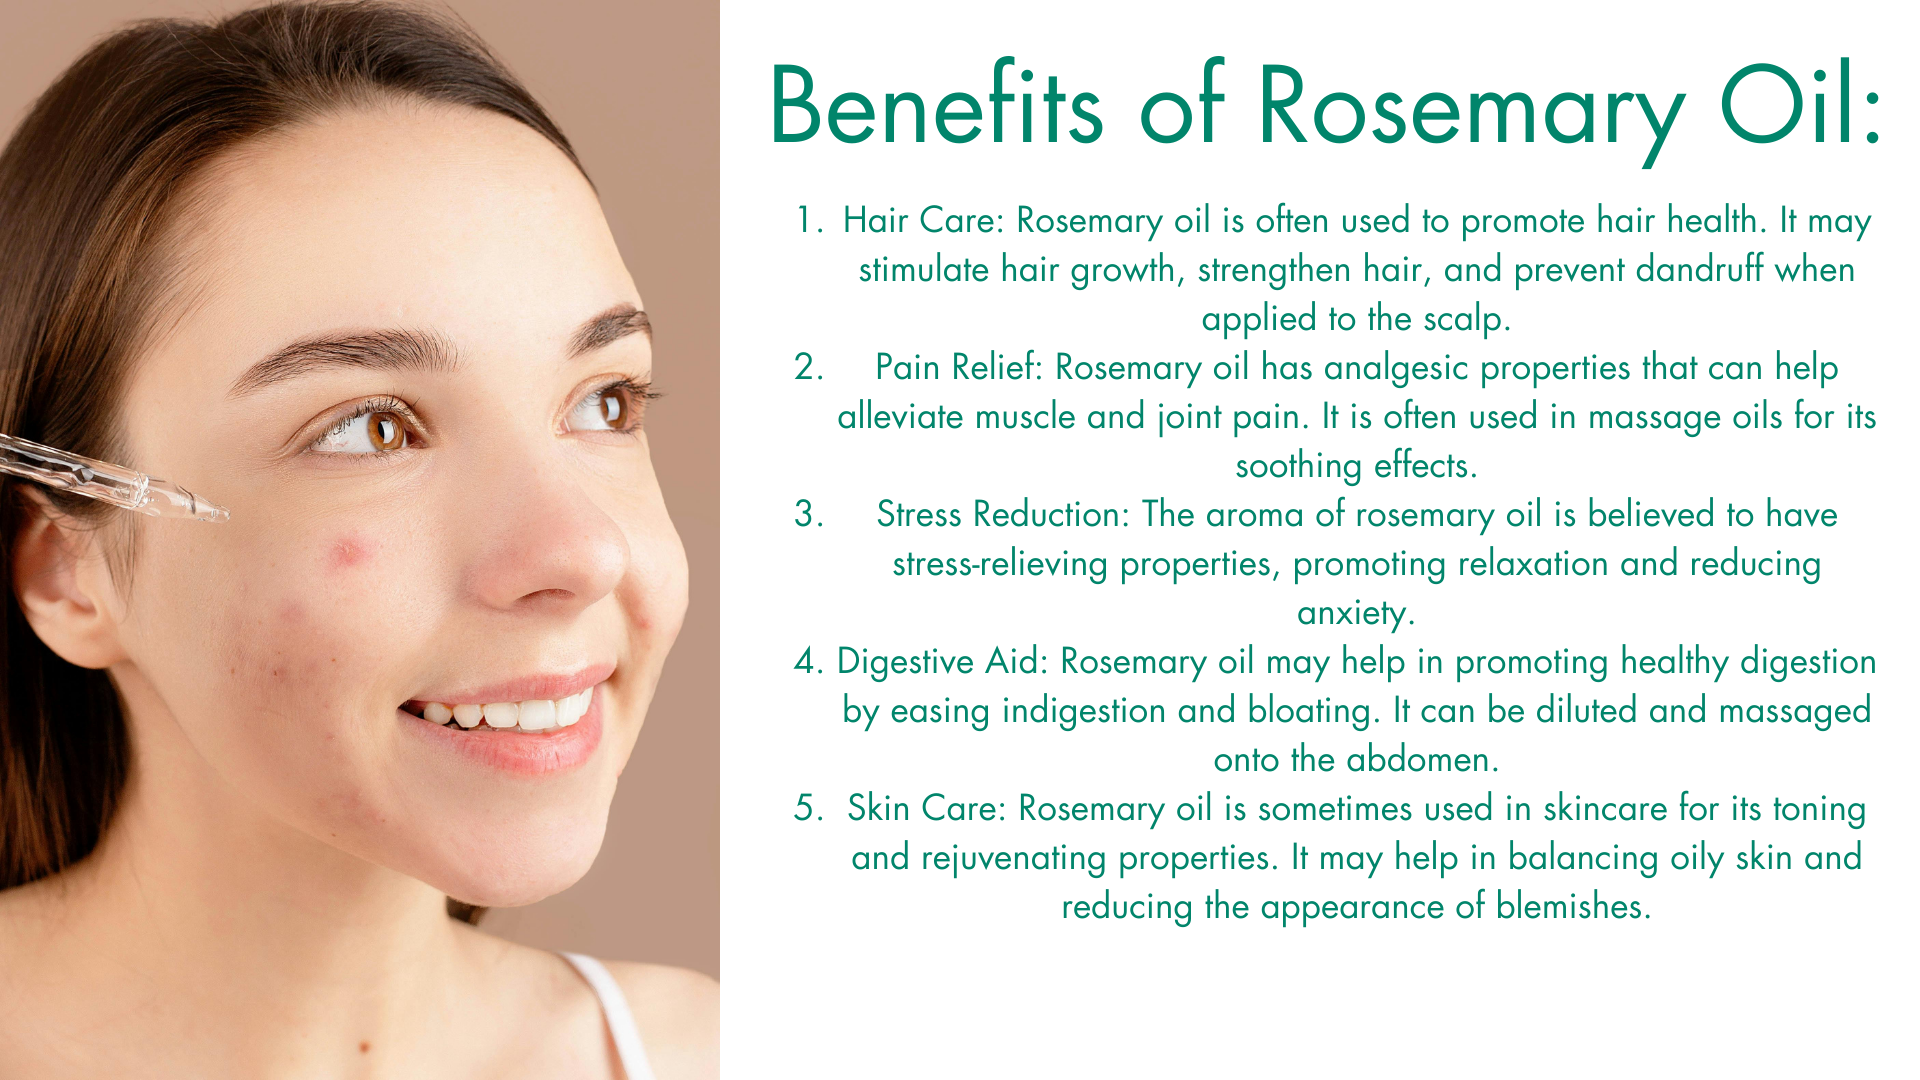 Benefits of Rosemary Oil by Kernlo: Hair Care: Rosemary oil is often used to promote hair health. It may stimulate hair growth, strengthen hair, and prevent dandruff when applied to the scalp.
Pain Relief: Rosemary oil has analgesic properties that can help alleviate muscle and joint pain. It is often used in massage oils for its soothing effects.
Stress Reduction: The aroma of rosemary oil is believed to have stress-relieving properties, promoting relaxation and reducing anxiety.
Digestive Aid: Rosemary oil may help in promoting healthy digestion by easing indigestion and bloating. It can be diluted and massaged onto the abdomen.
Skin Care: Rosemary oil is sometimes used in skincare for its toning and rejuvenating properties. It may help in balancing oily skin and reducing the appearance of blemishes.